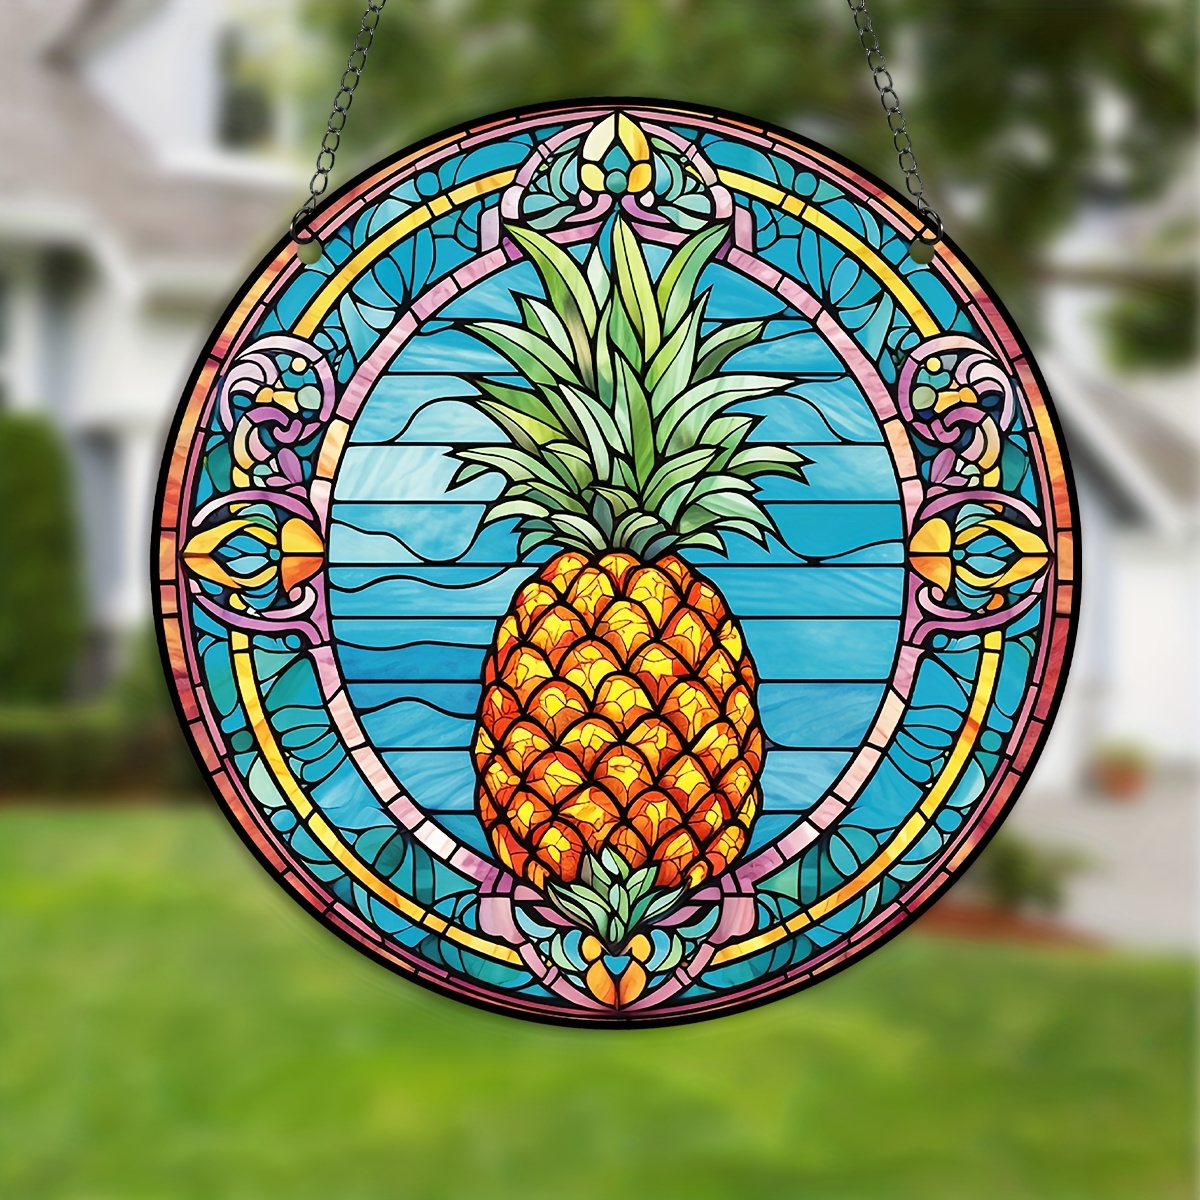 faux stained glass kit pineapple - Google Search  Stained glass windows,  Faux stained glass, Stained glass crafts